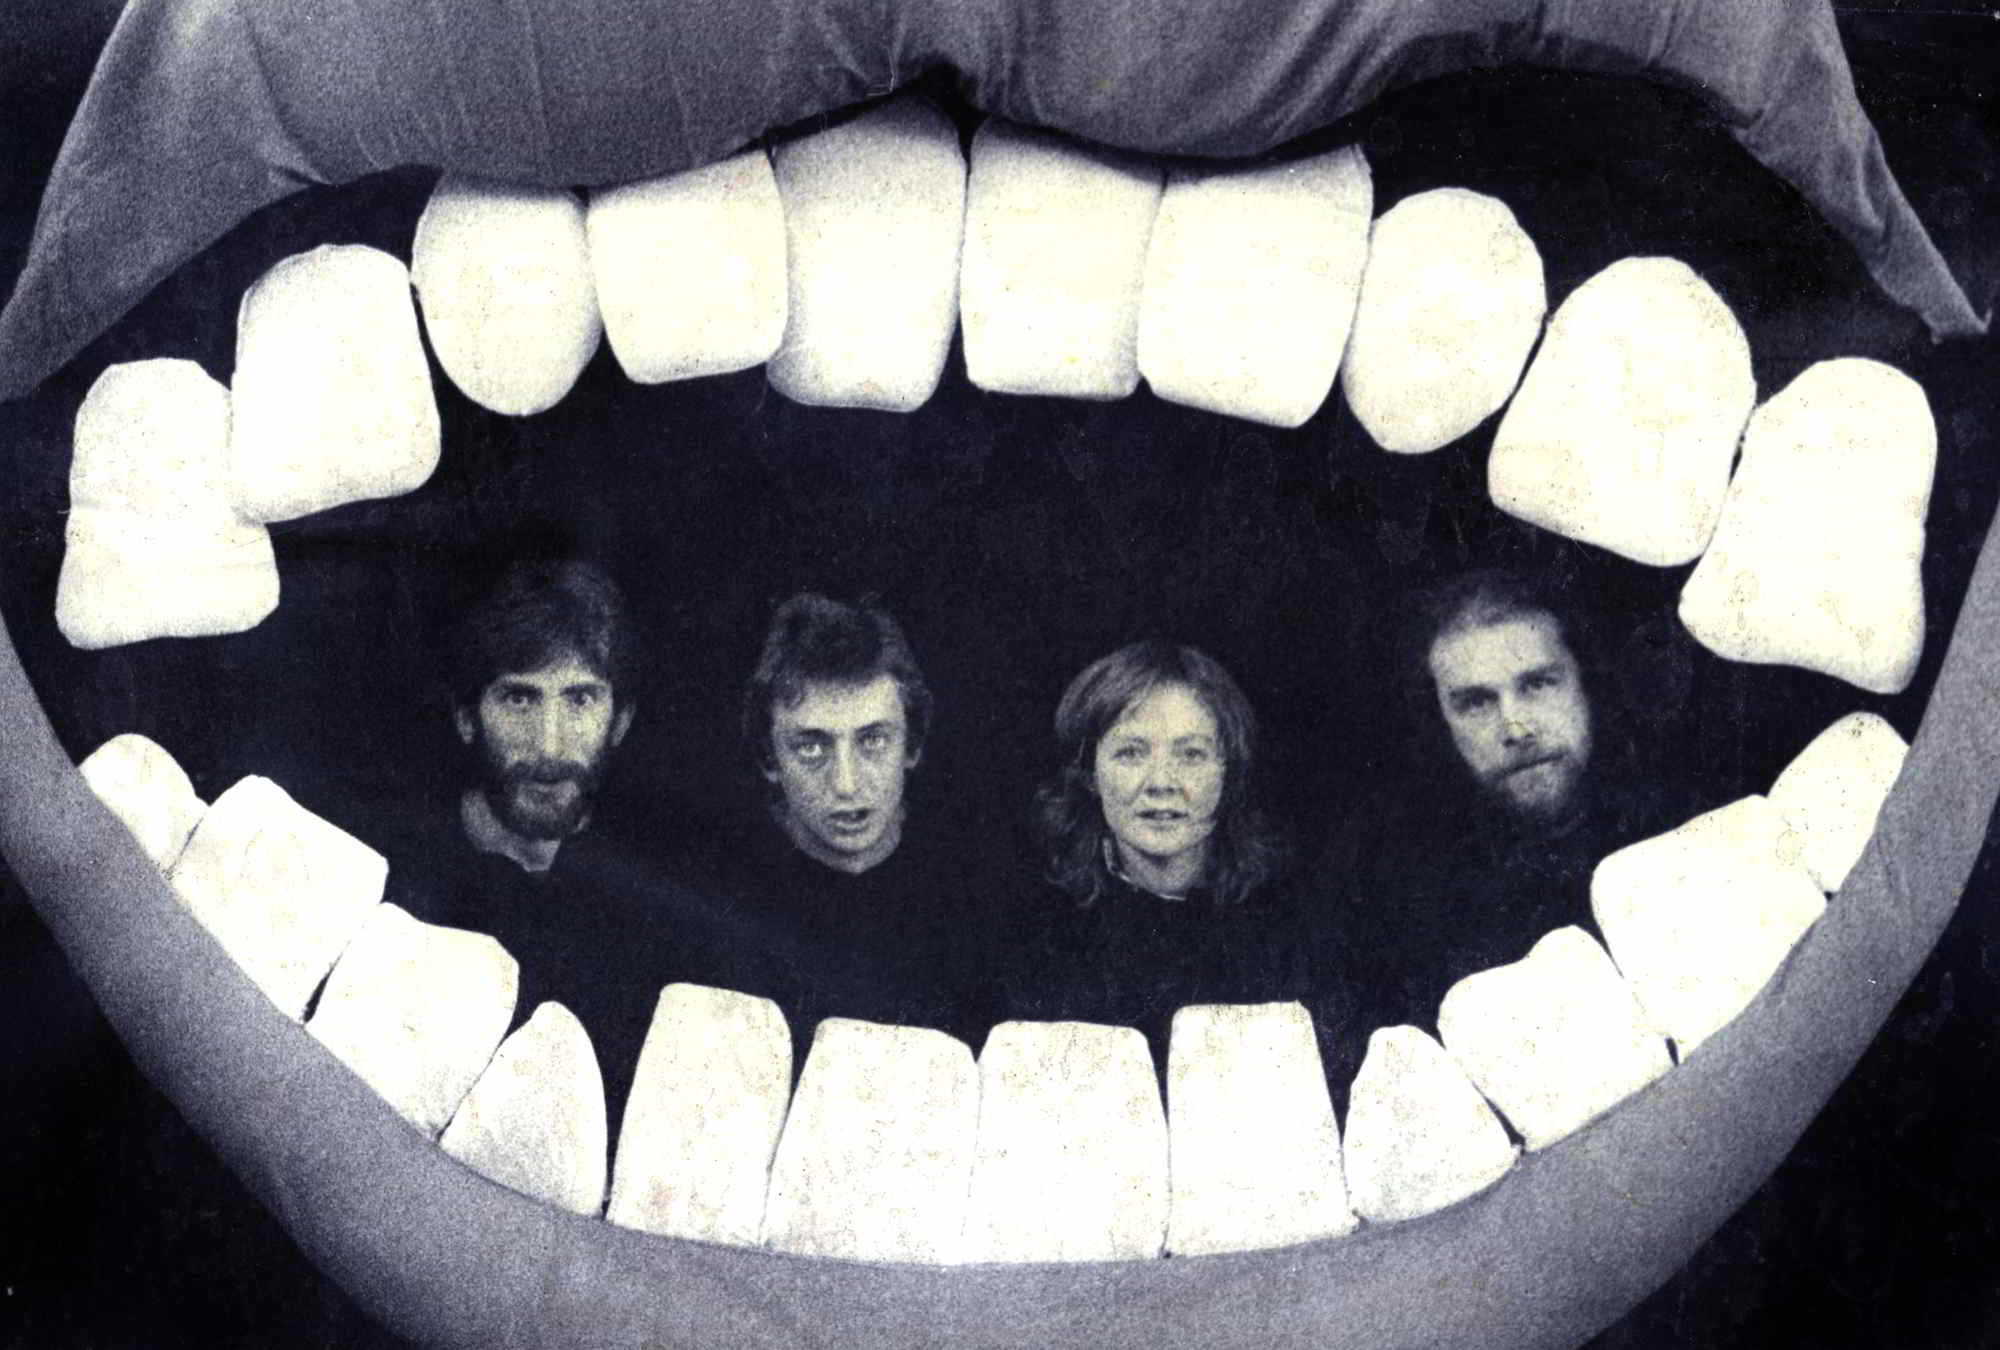 Handspan Theatre The Mouth Show cast 1979 portrait of four people inside the mouth